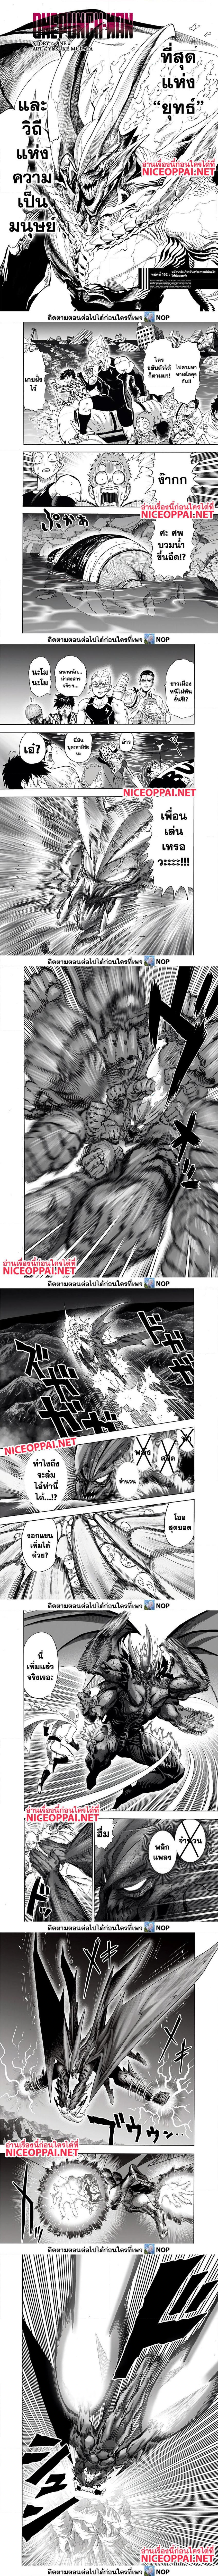 One Punch Man 164 (1)